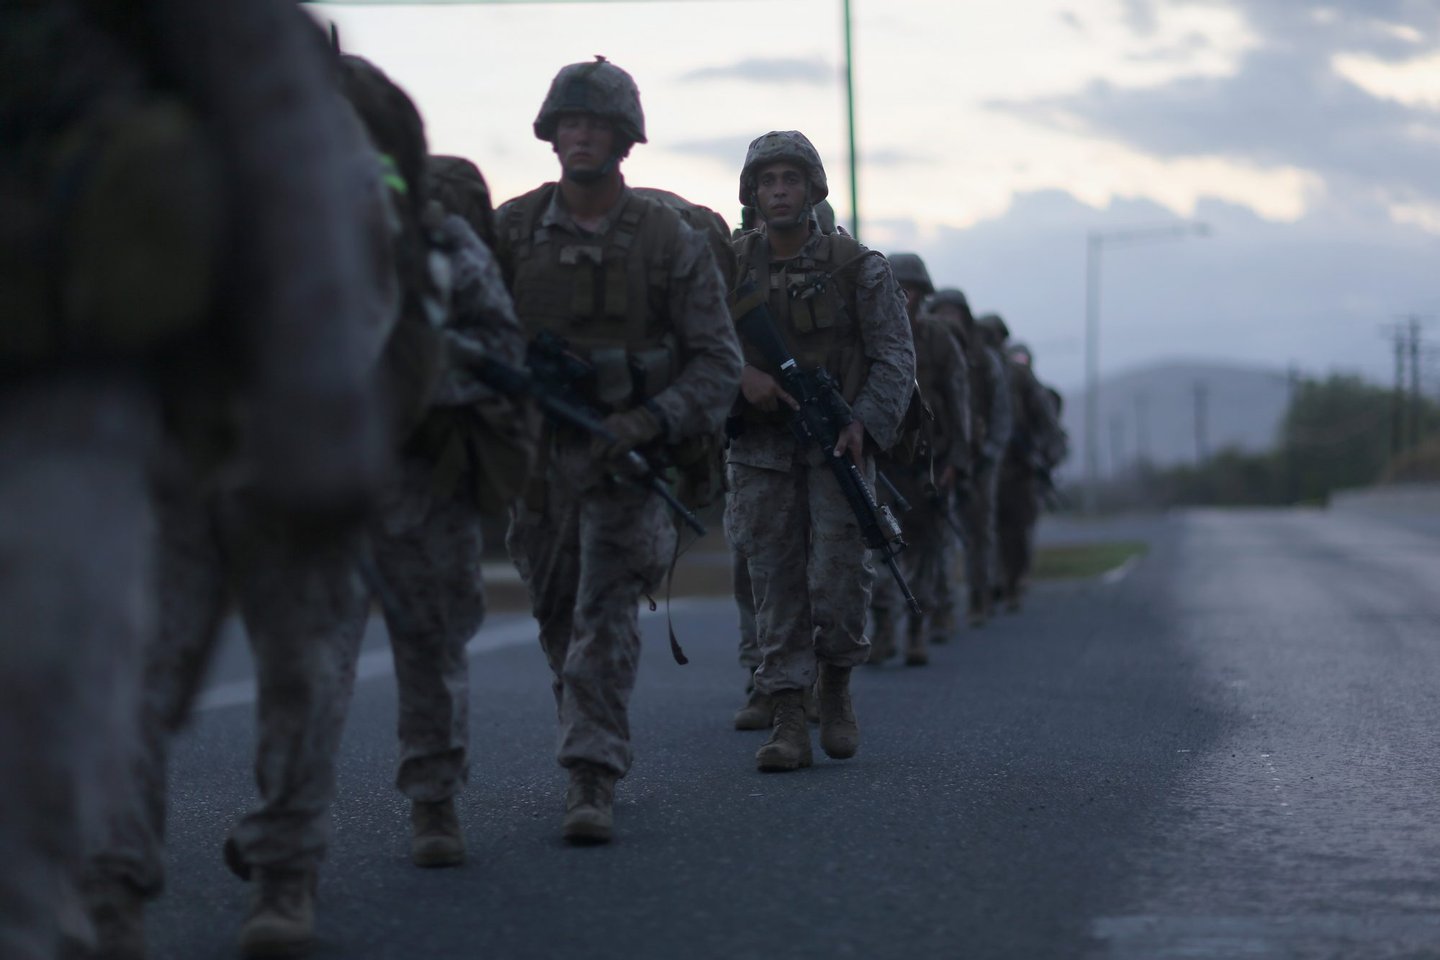 GUANTANAMO BAY, CUBA - JUNE 27: (EDITORS NOTE: Image has been reviewed by the U.S. Military prior to transmission.) U.S. Marines conduct a road march in the early morning on June 27, 2013 in Guantanamo Bay, Cuba.The U.S. Naval Station at Guantanamo Bay, houses the American detention center for 'enemy combatants'. President Barack Obama has recently spoken again about closing the prison which has been used to hold prisoners from the invasion of Afghanistan and the war on terror since early 2002. (Photo by Joe Raedle/Getty Images)